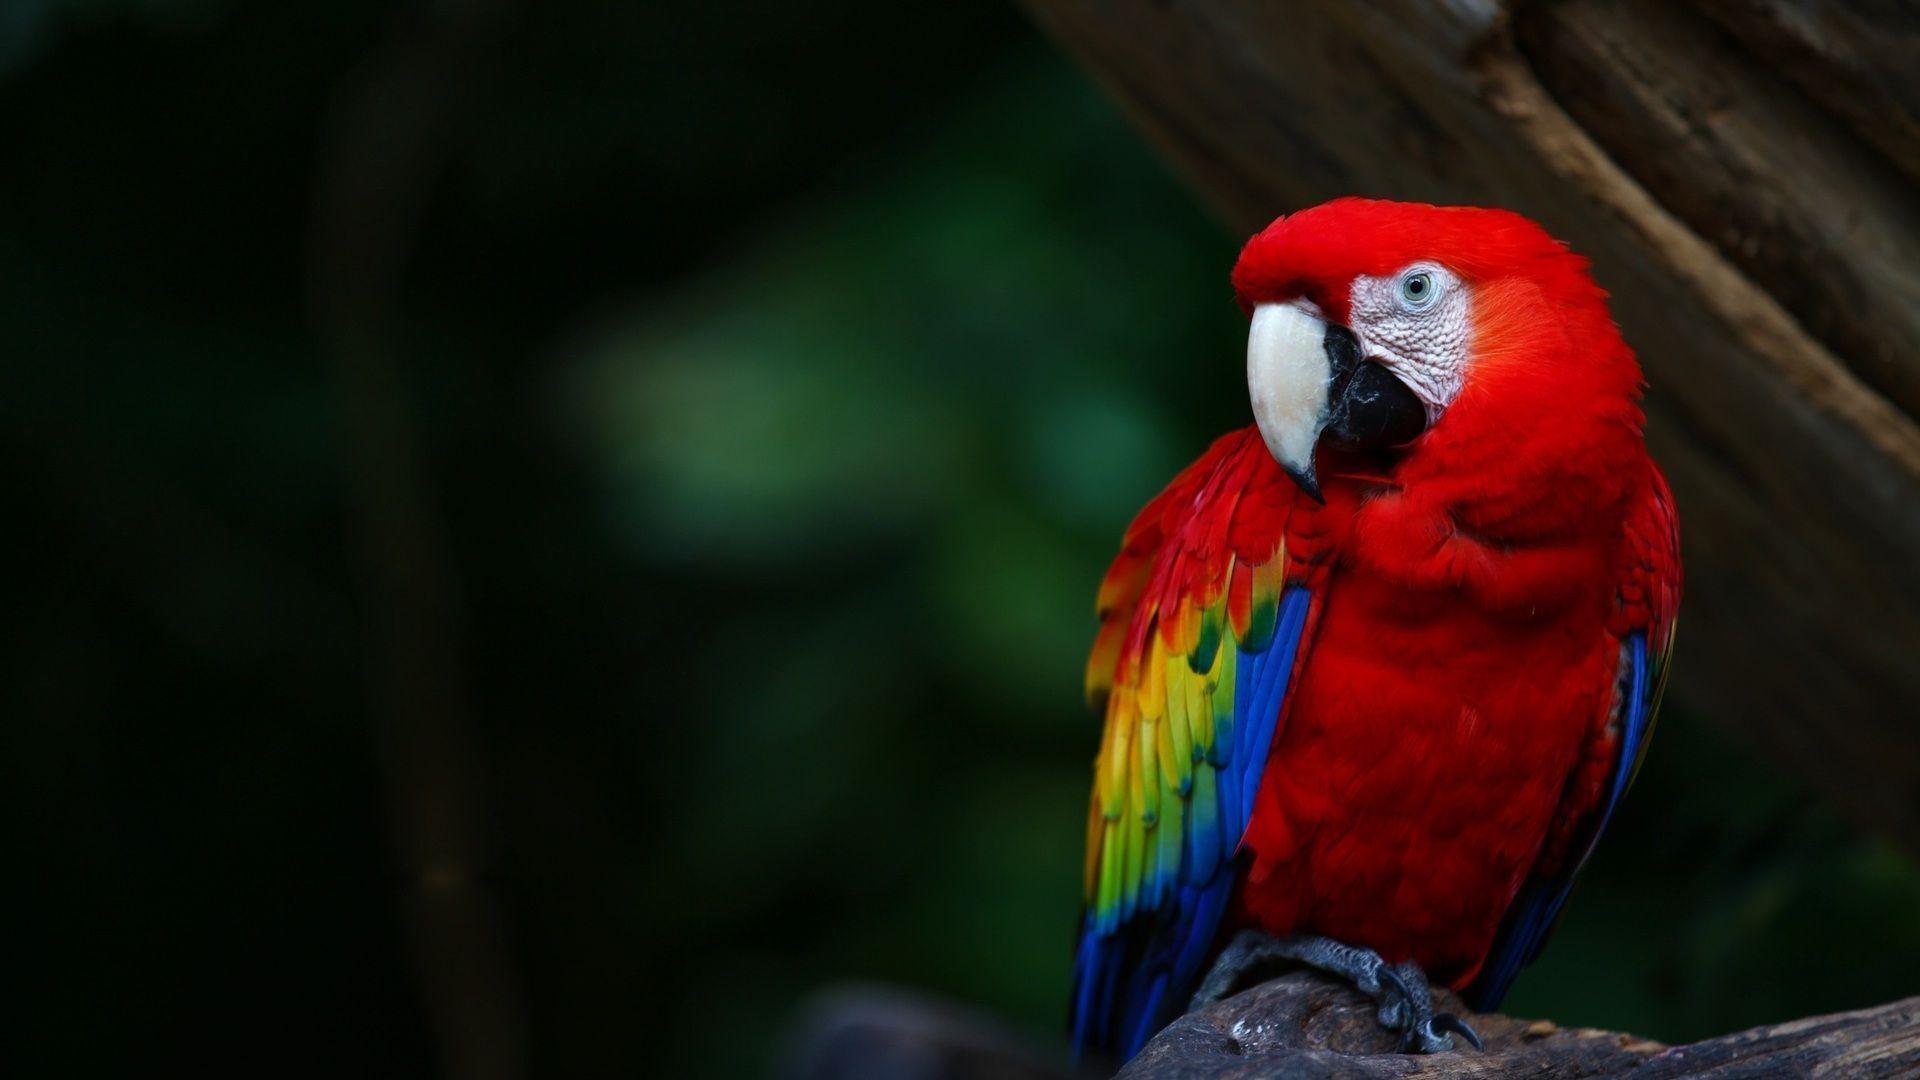 Awesome Alone Parrot HD Wallpaper 1080p. Widescreen Wallpaper